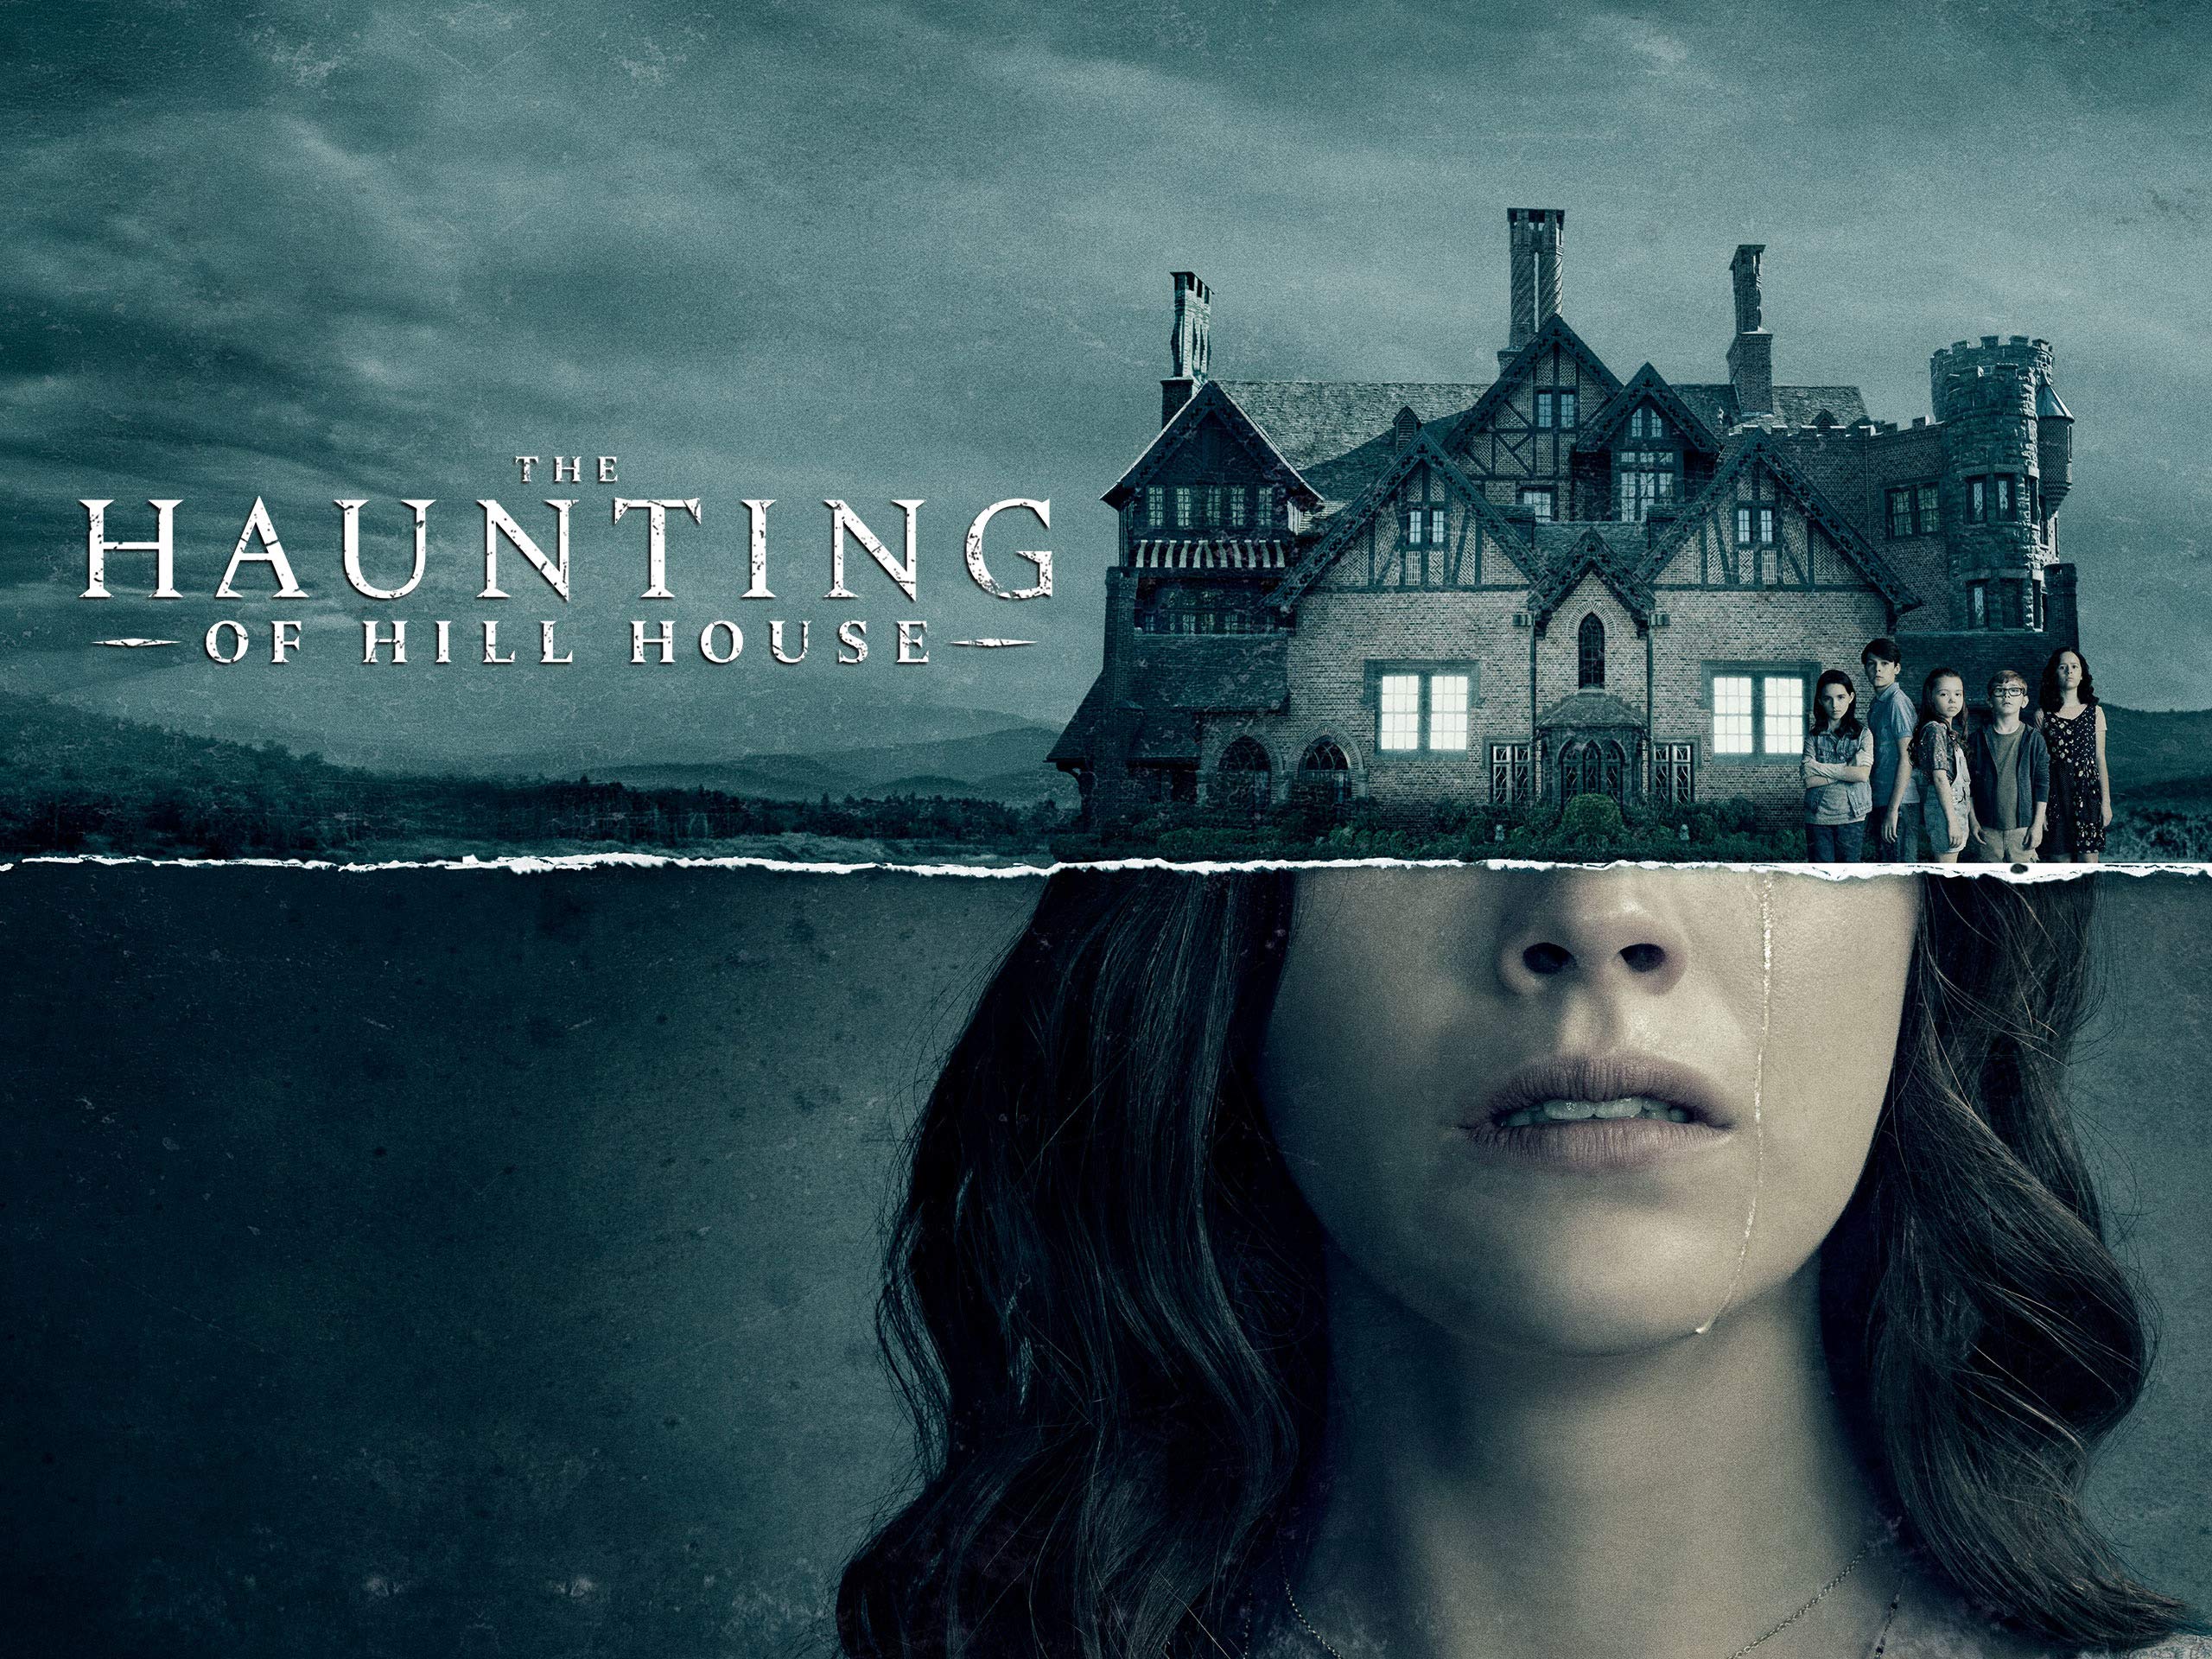 Download The Haunting of Hill House (2018) (Dual Audio) Series on Netflix | Techoffical